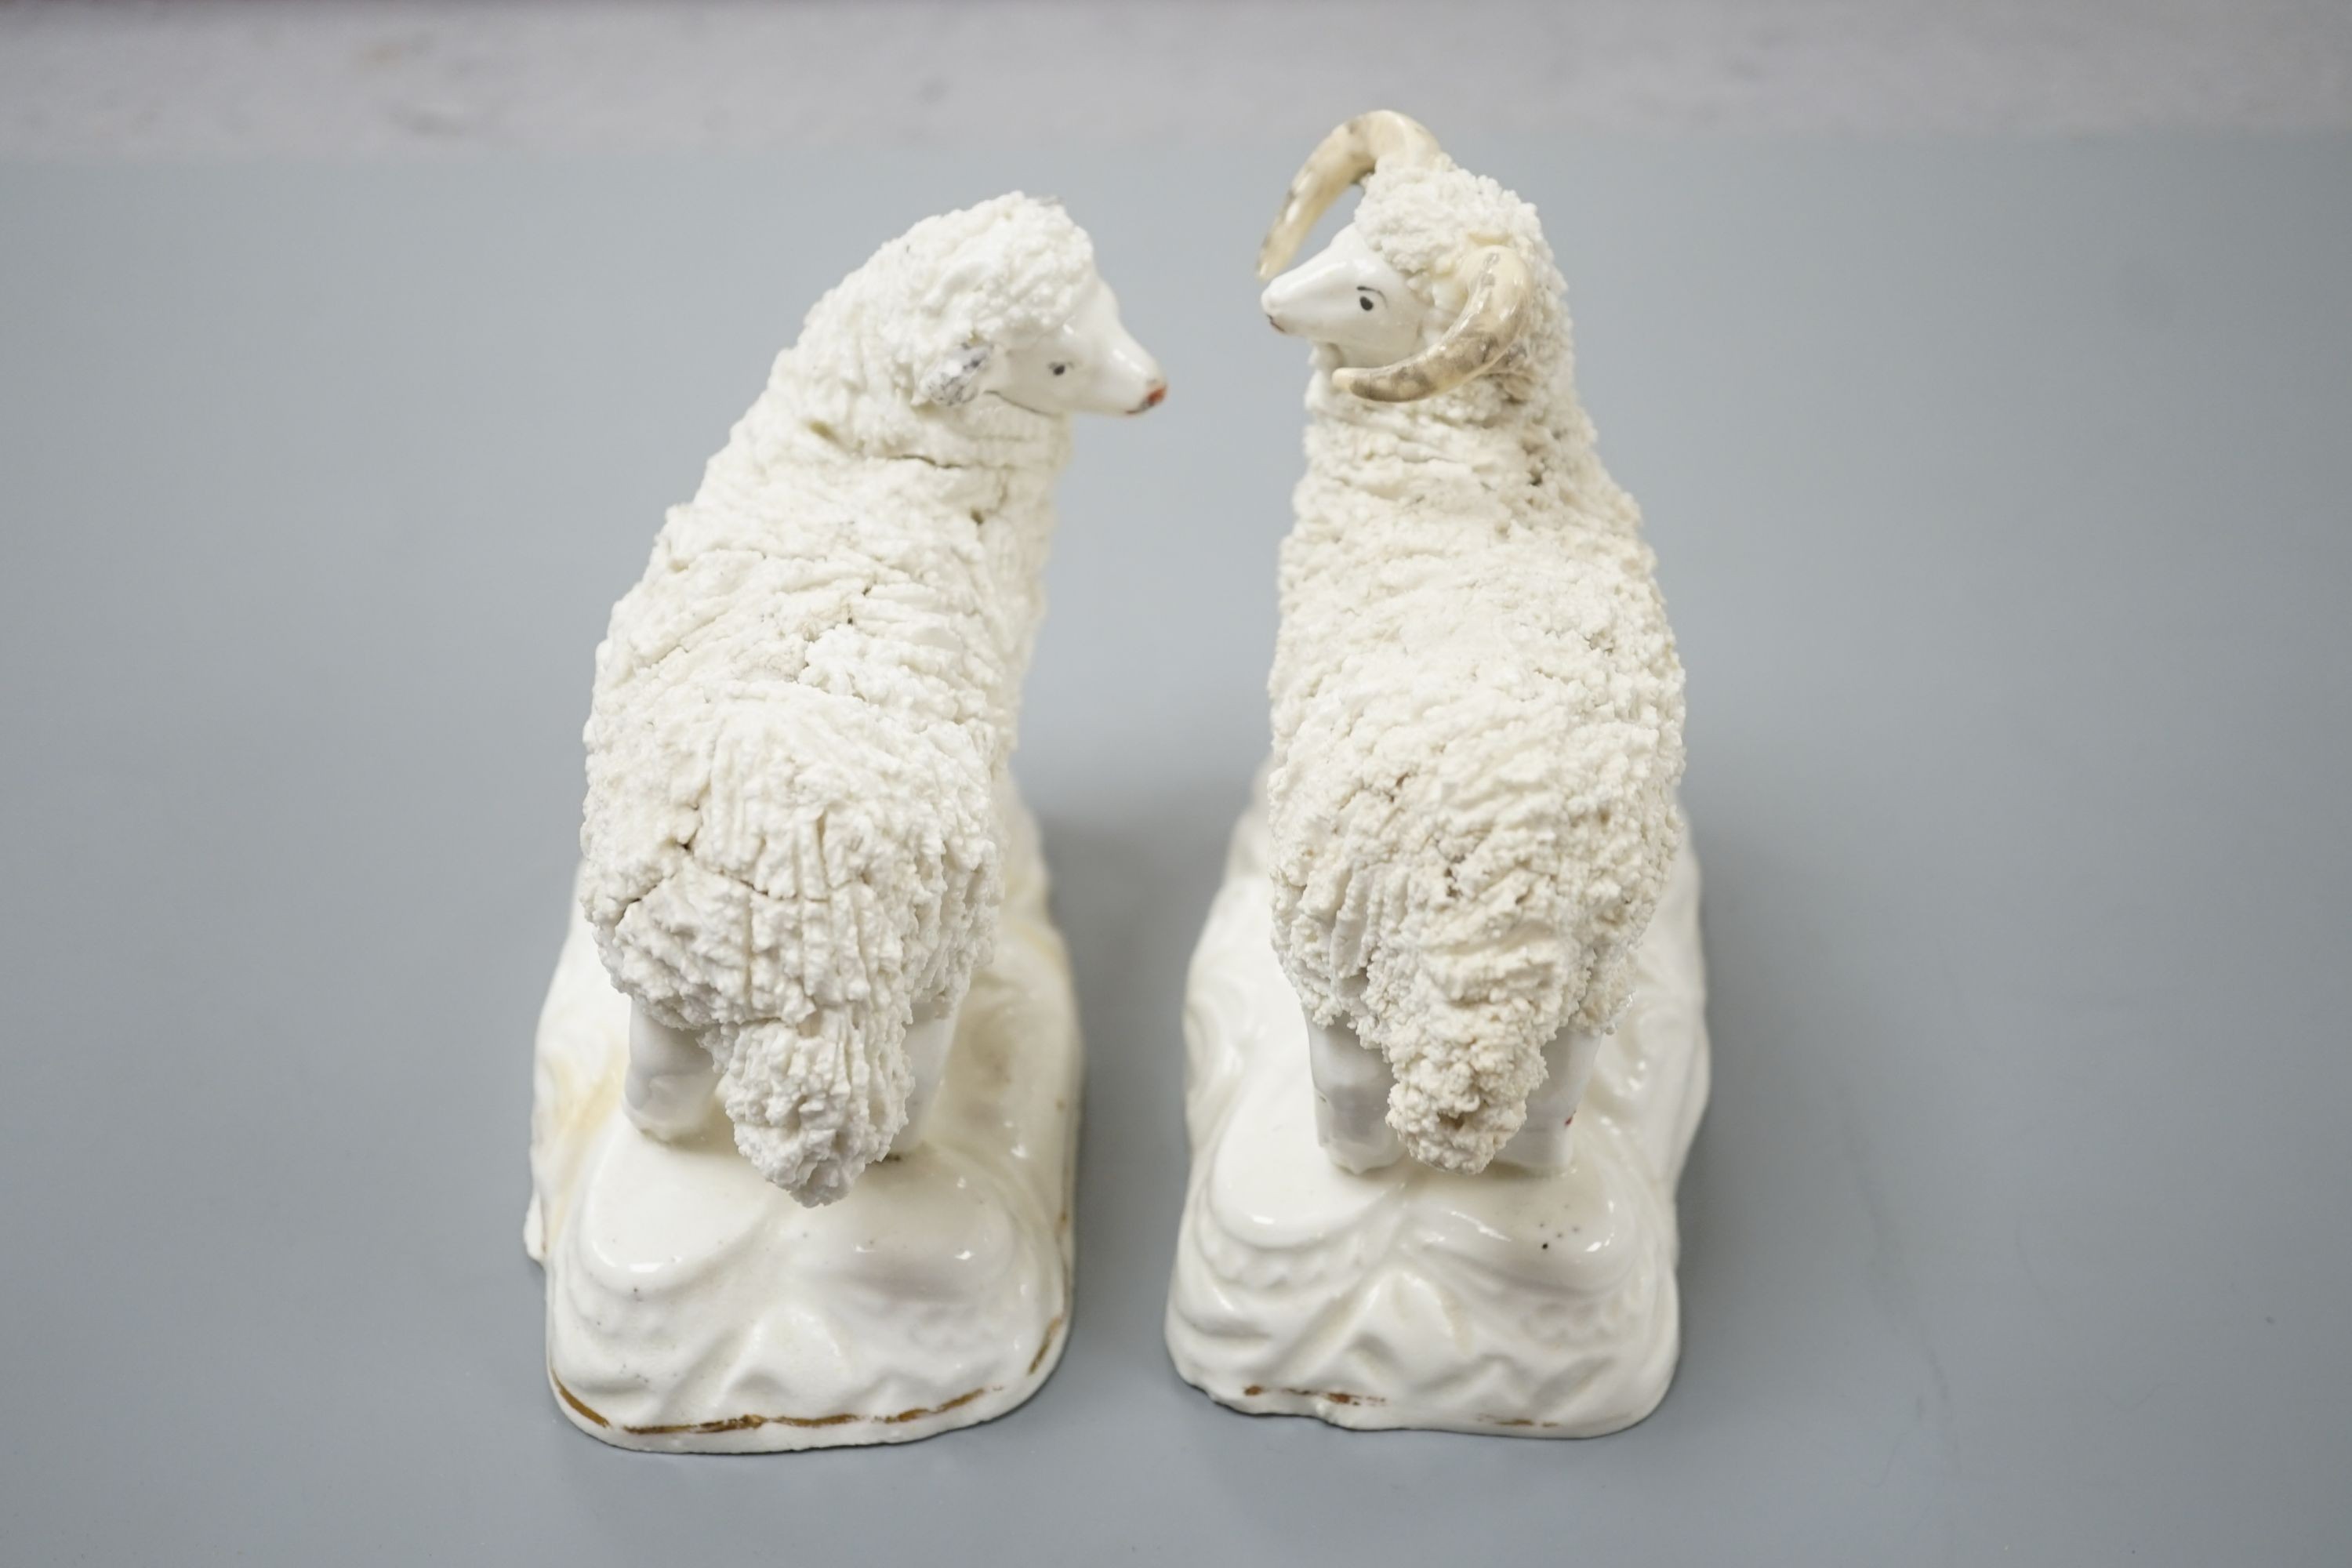 A pair of large Staffordshire porcelain figures of a ewe and a ram, c.1835–50, 10.5 and 11 cm high, Provenance: Dennis G.Rice collection